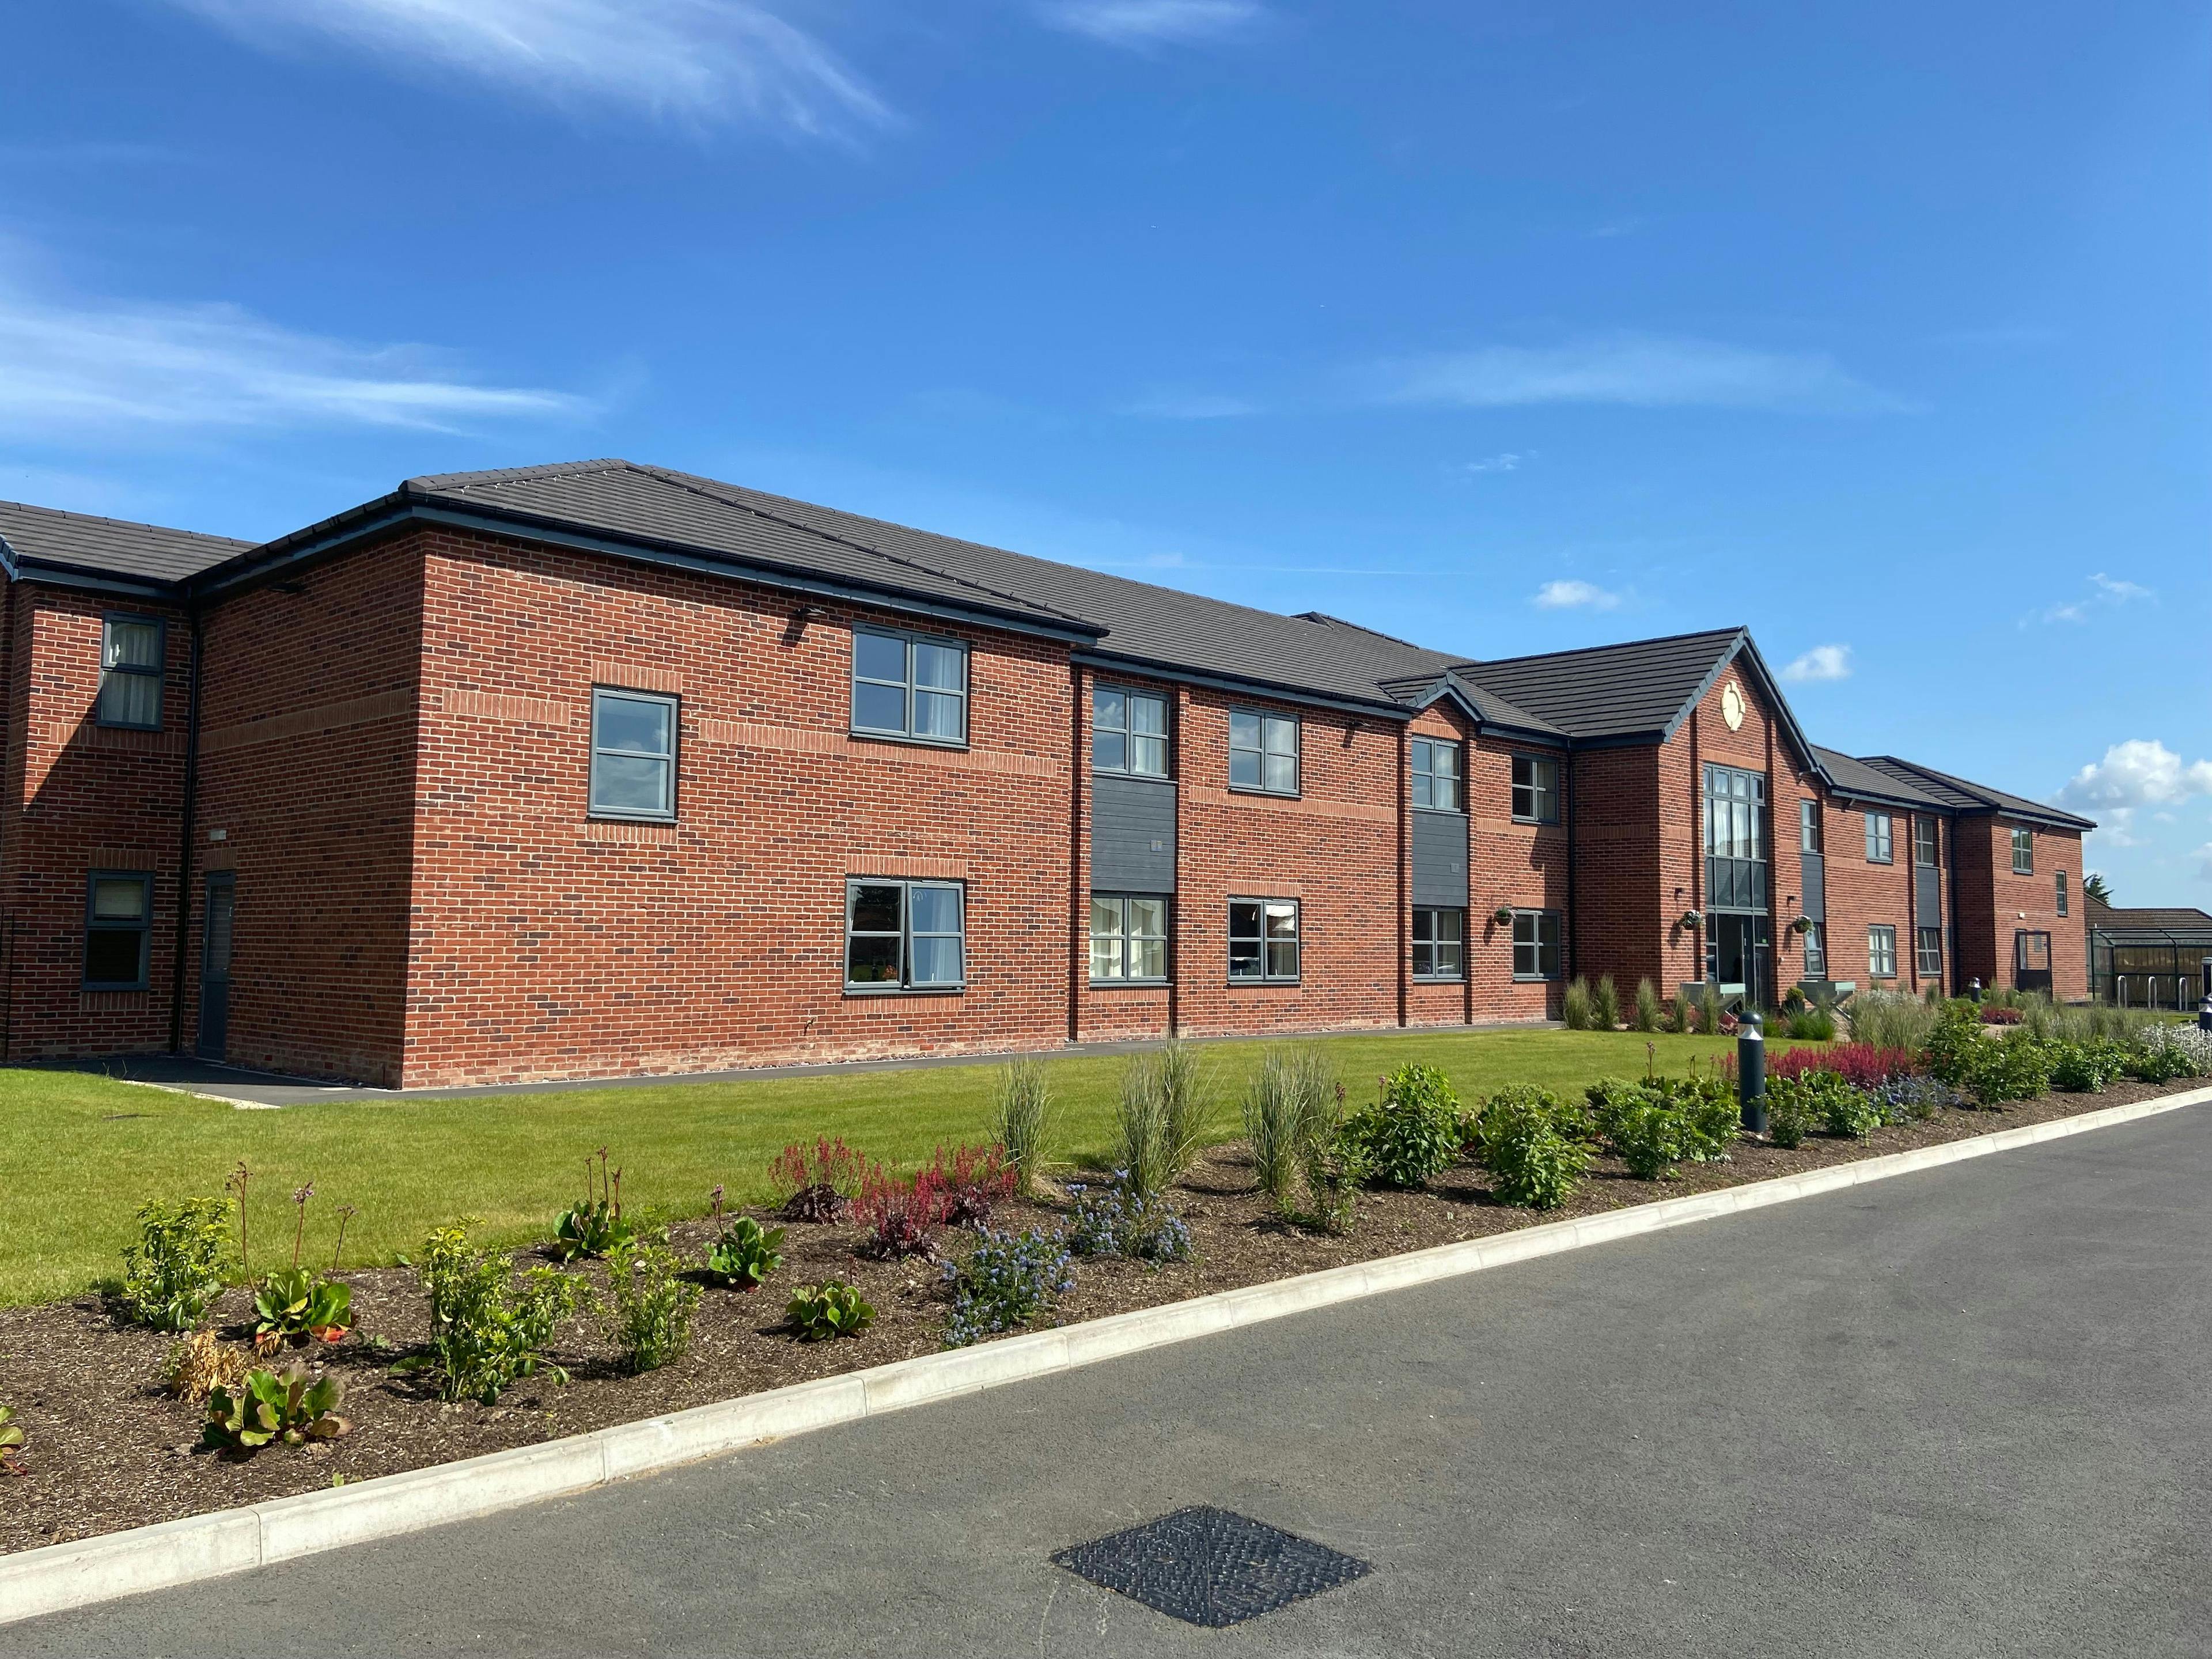 Exterior of Meadows Park care home in Louth, Lincolnshire